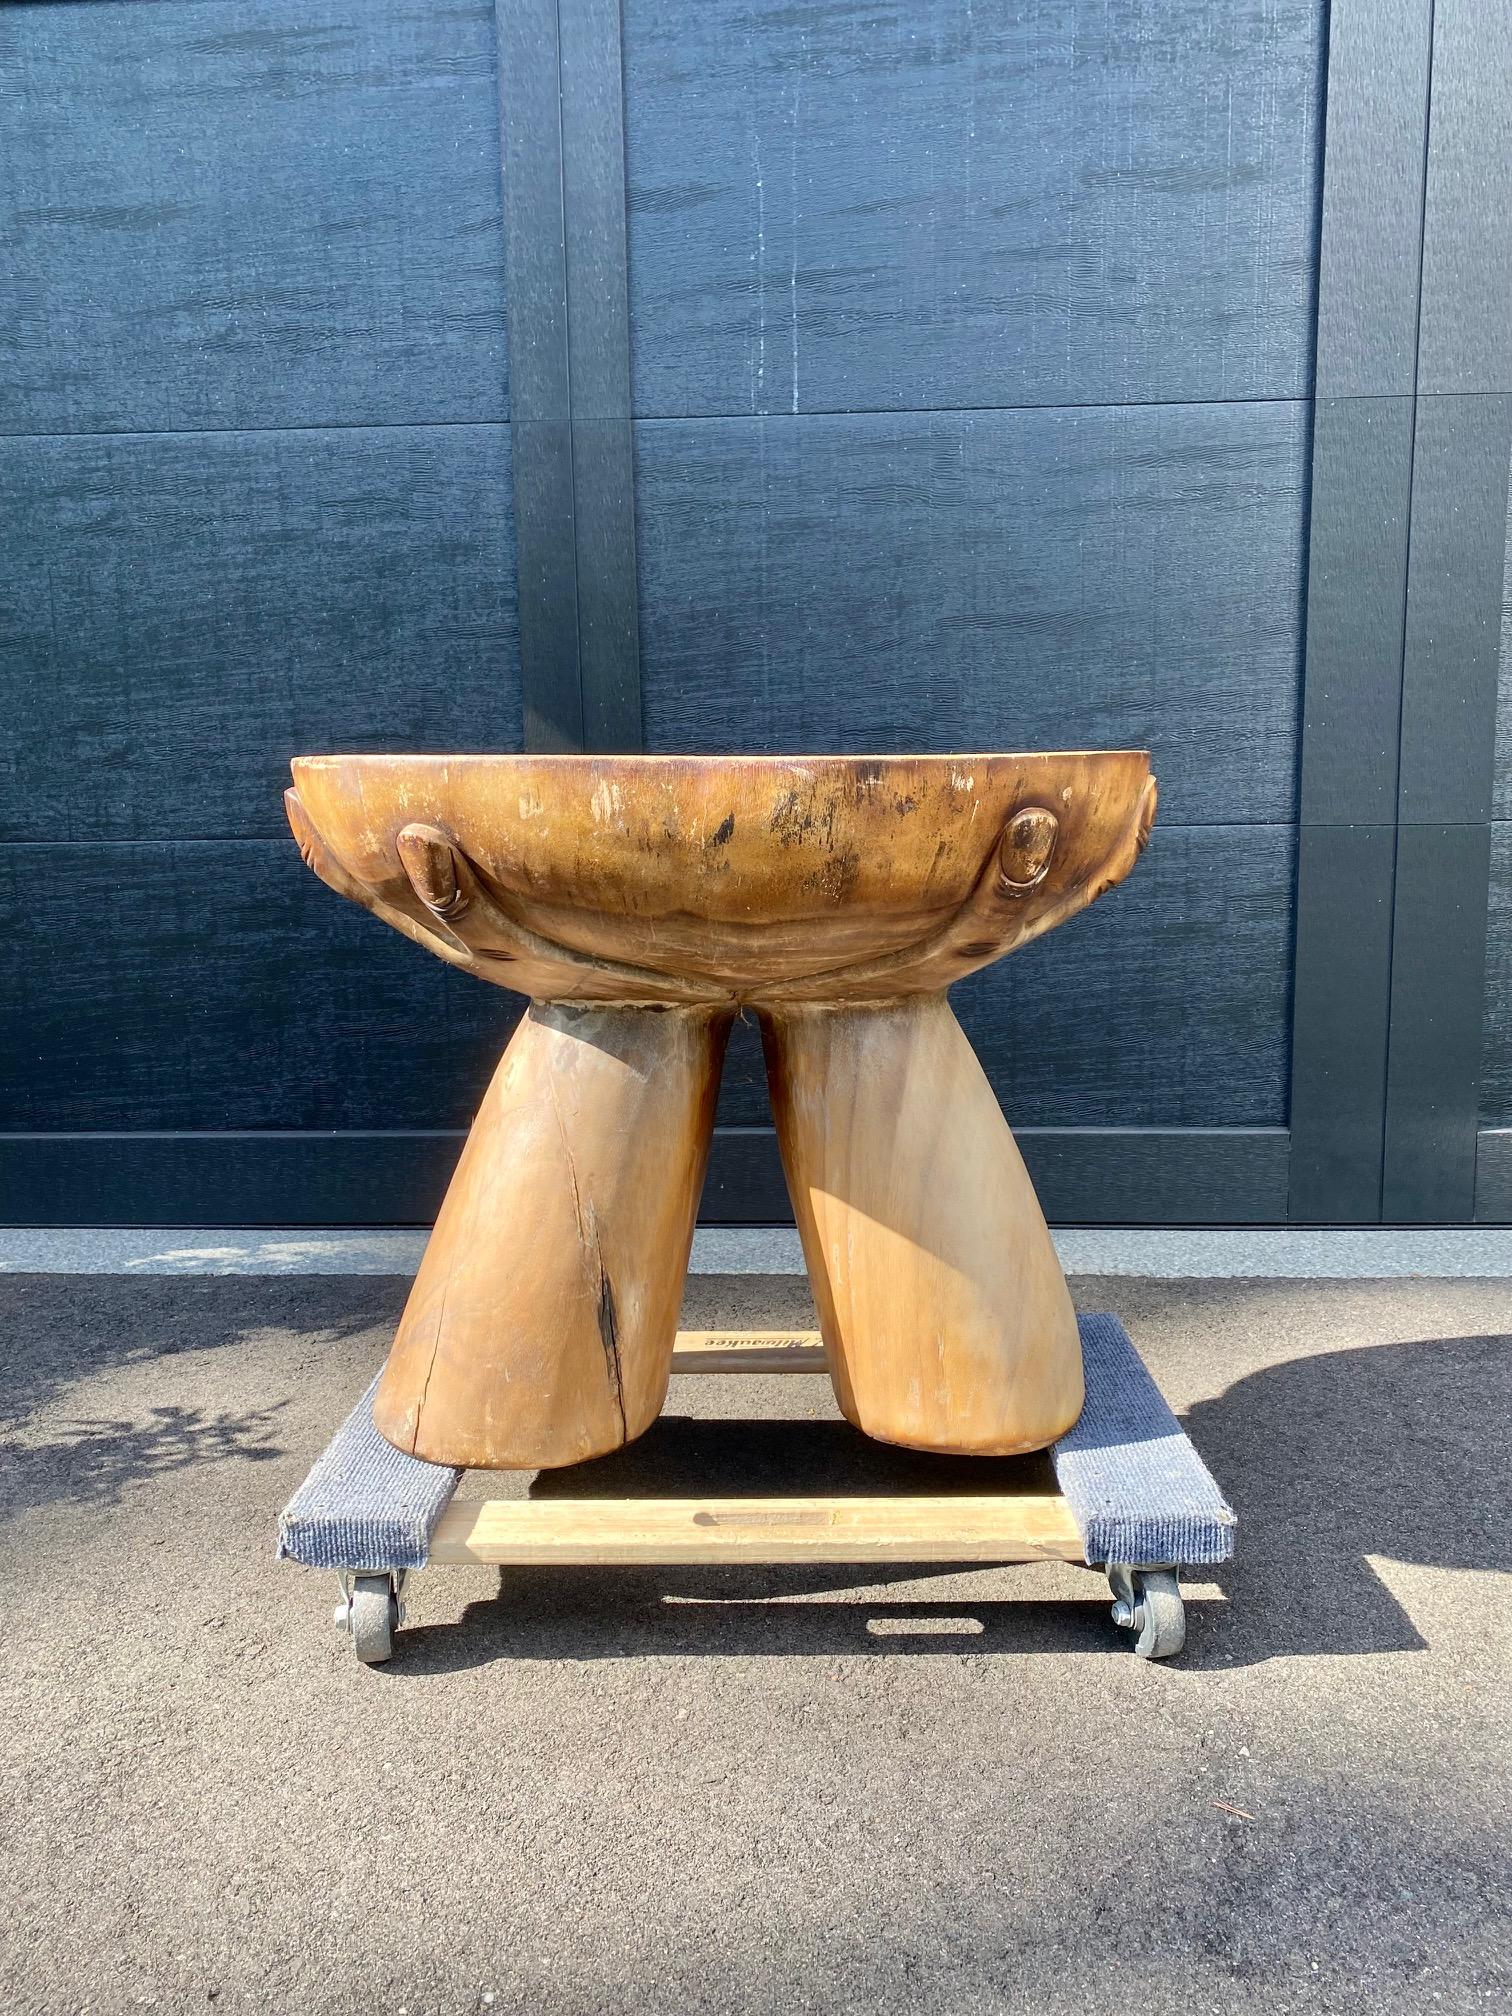 A stunning, handmade wooden accent table made from a single tree stump fashioned into a hand motif. An excellent piece of primitive work showing true craftsmanship -- a one-of-a-kind piece to own.